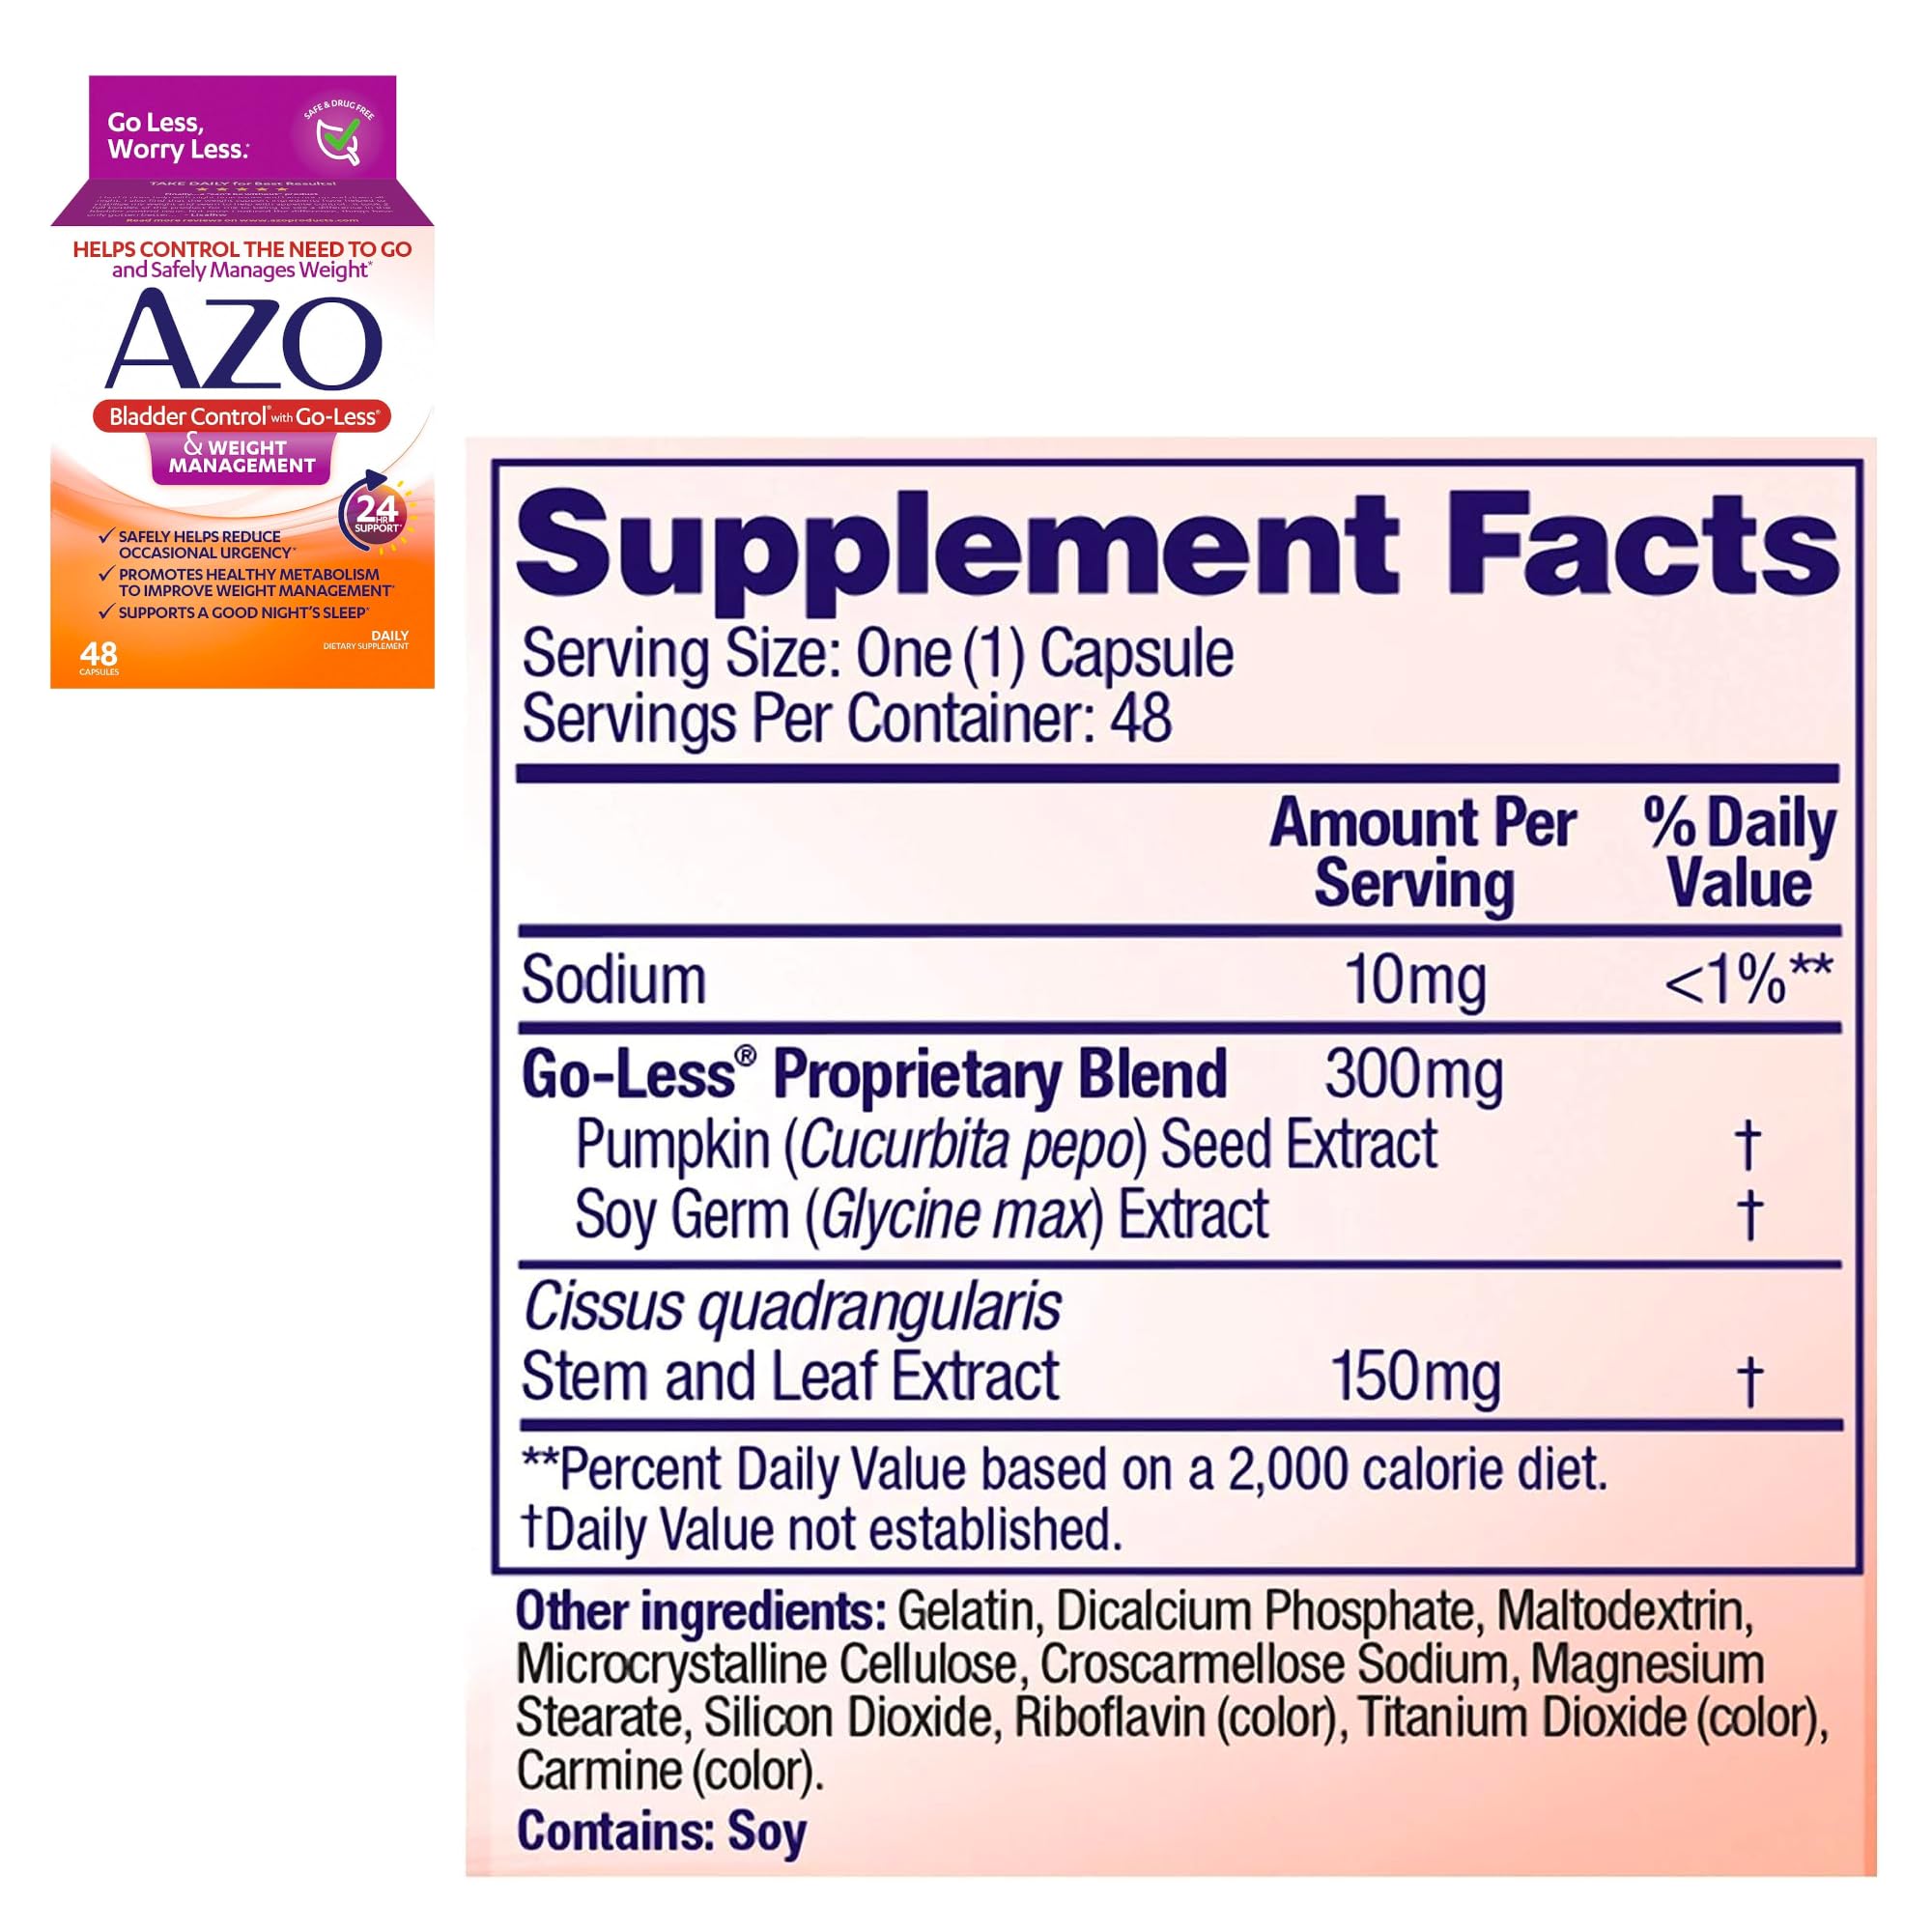 AZO Bladder Control with Go-Less & Weight Management Dietary Supplement, 48 Count + Cranberry Pro Urinary Tract Health Supplement 600mg PACRAN, 1 Serving = More Than 1 Glass of Cranberry Juice 100 CT